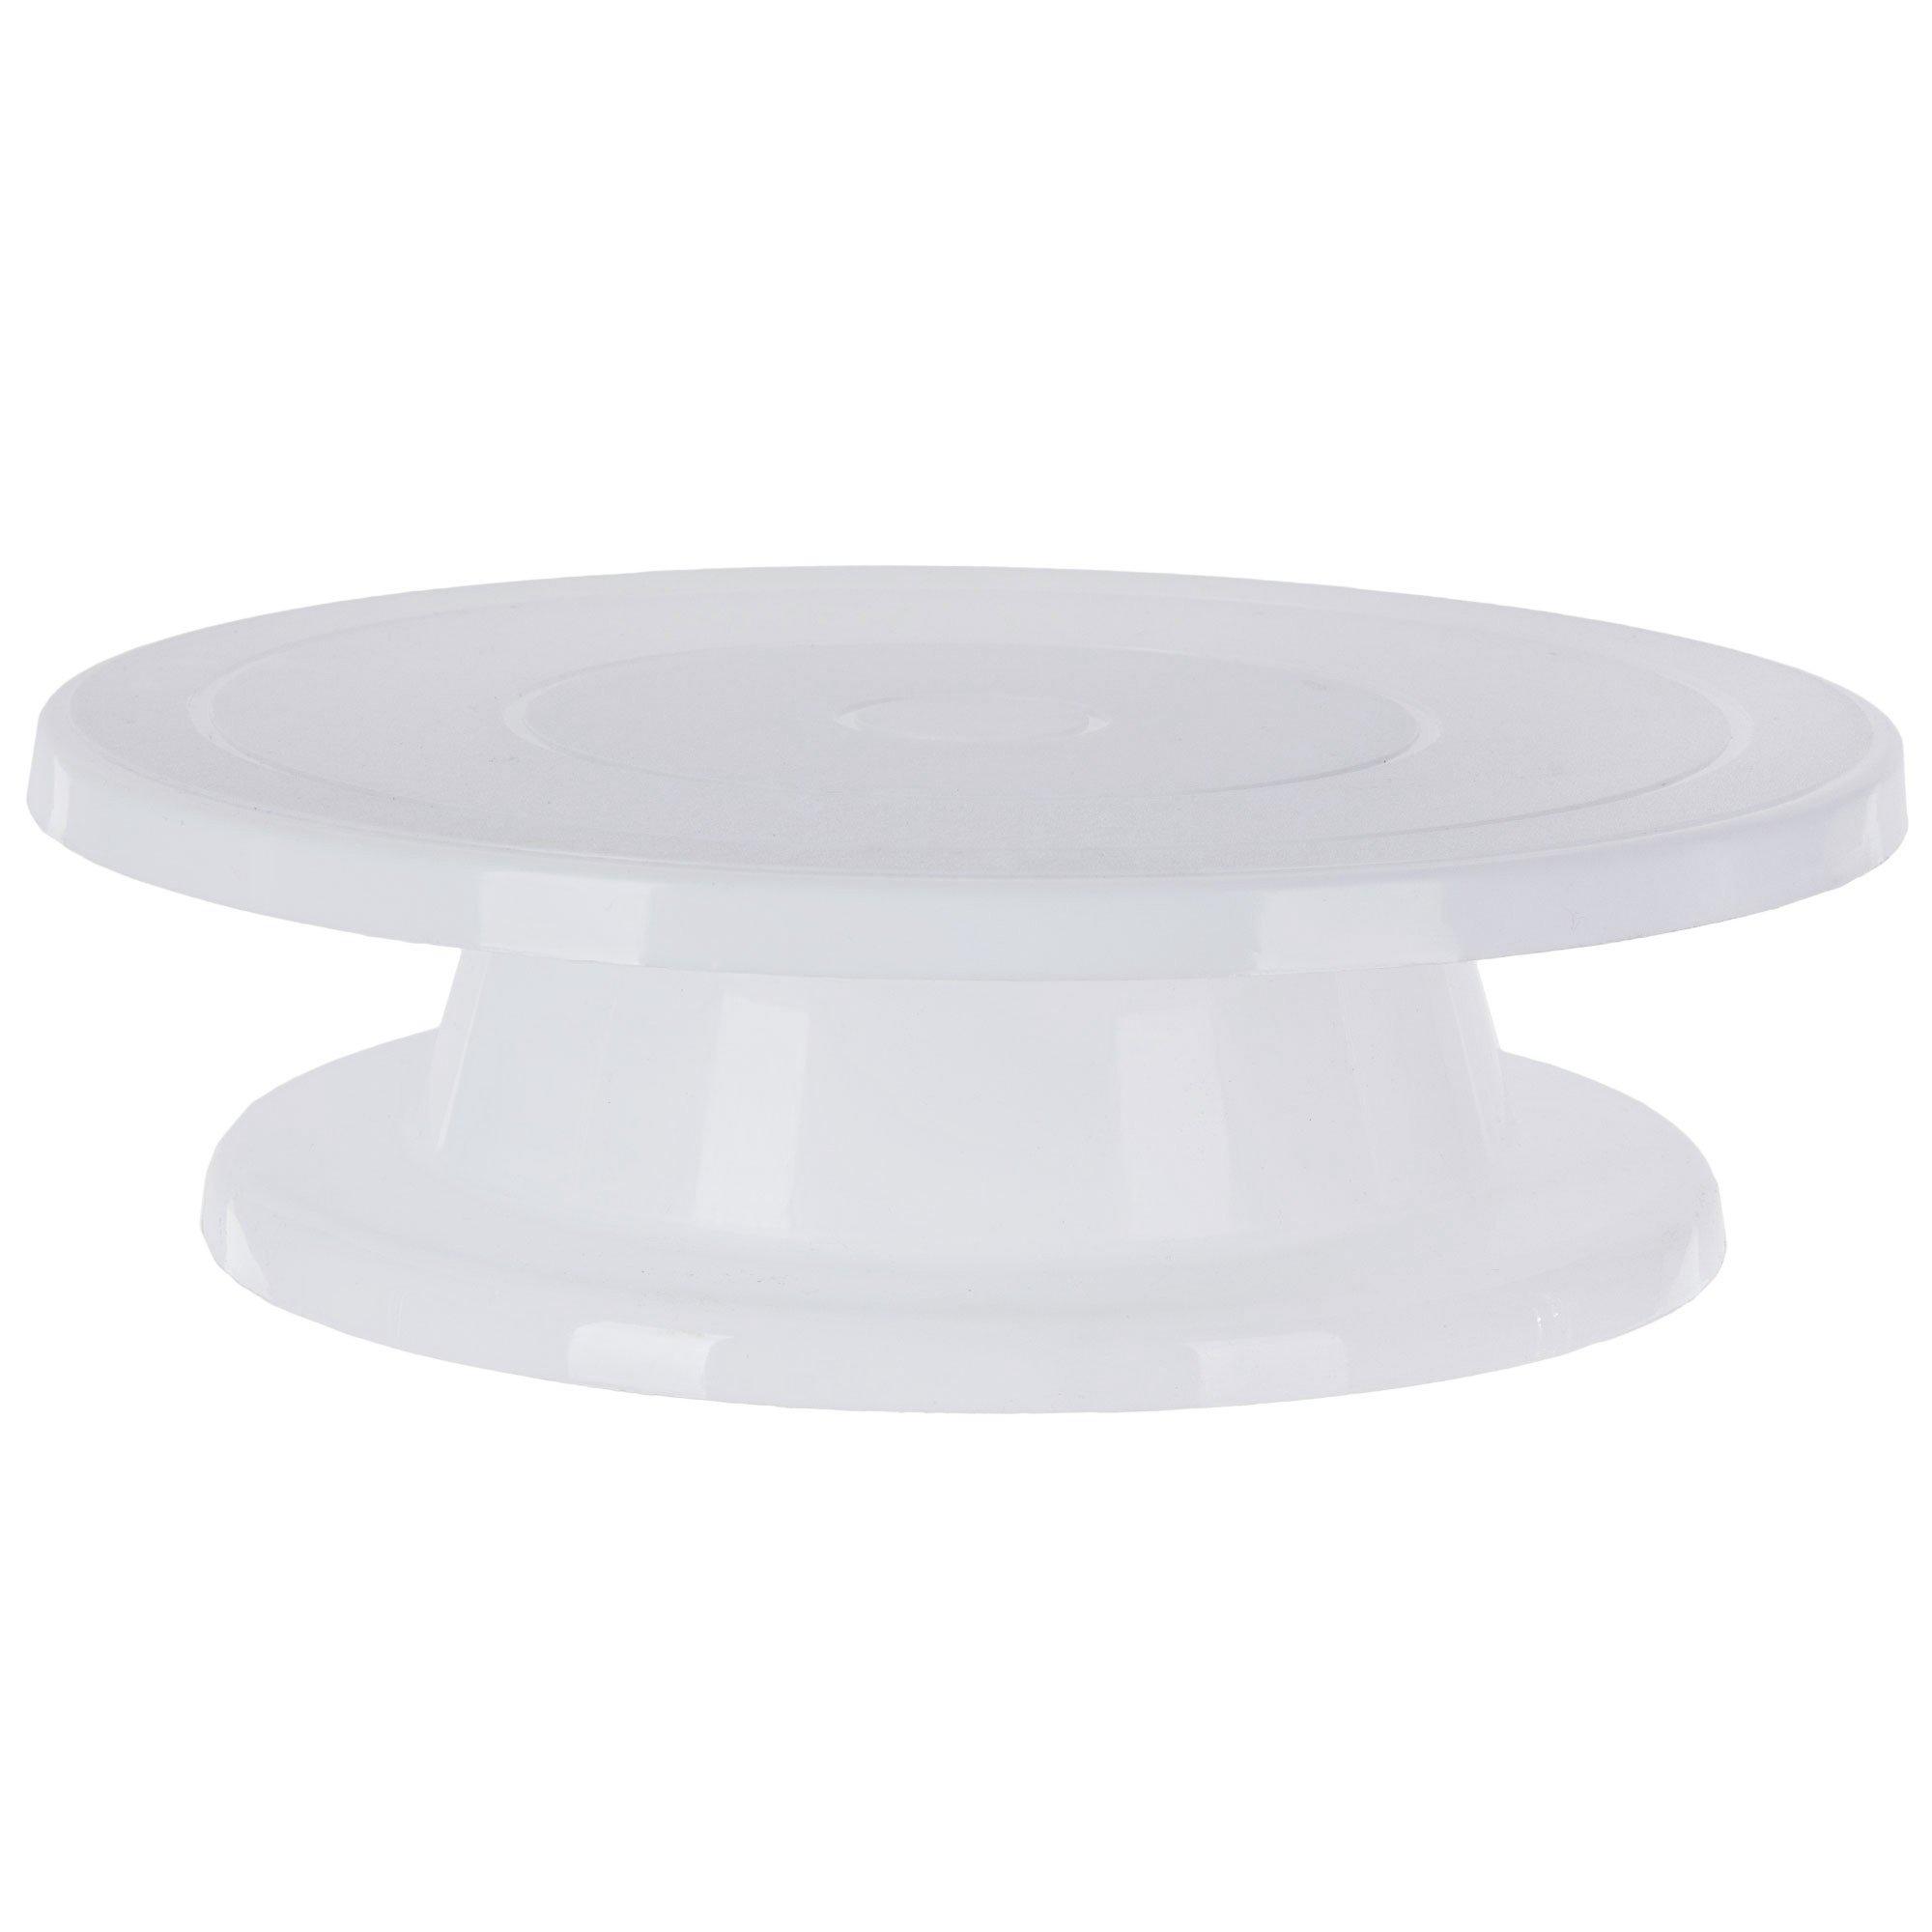 Cake Decorating Turntable - Party Time, Inc.